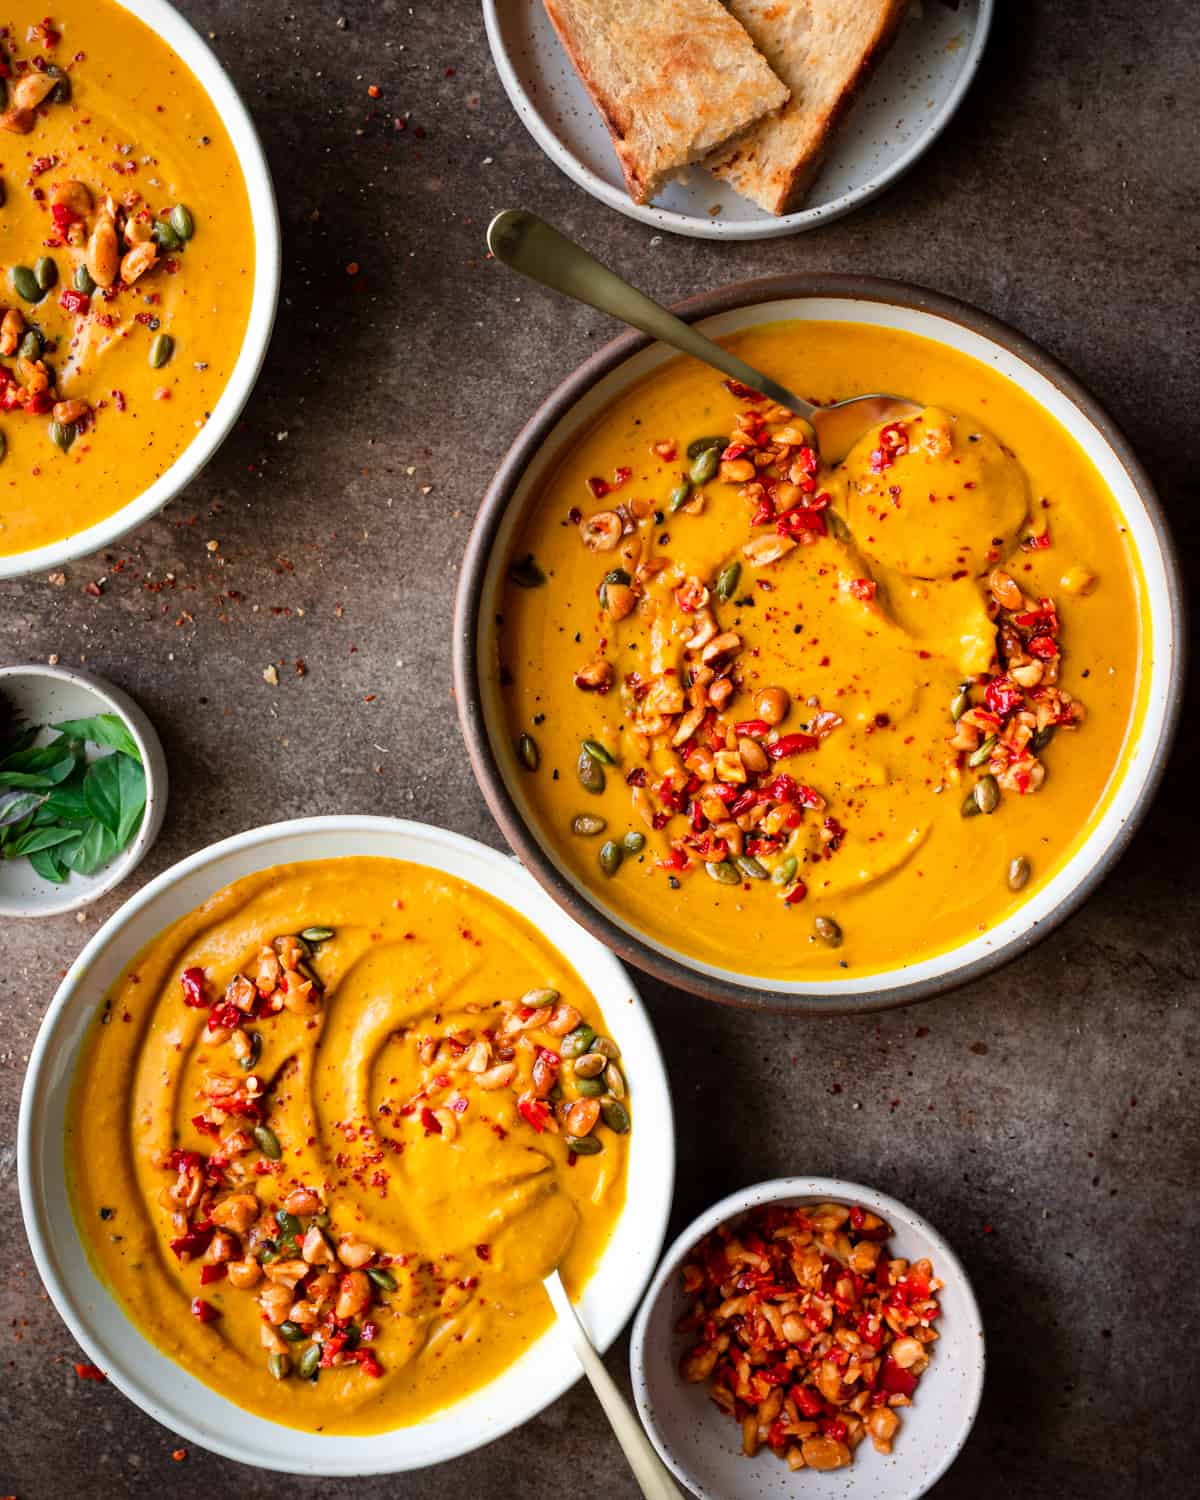 three bowls of thai pumpkin soup garnished with chili peppers on a brown table.